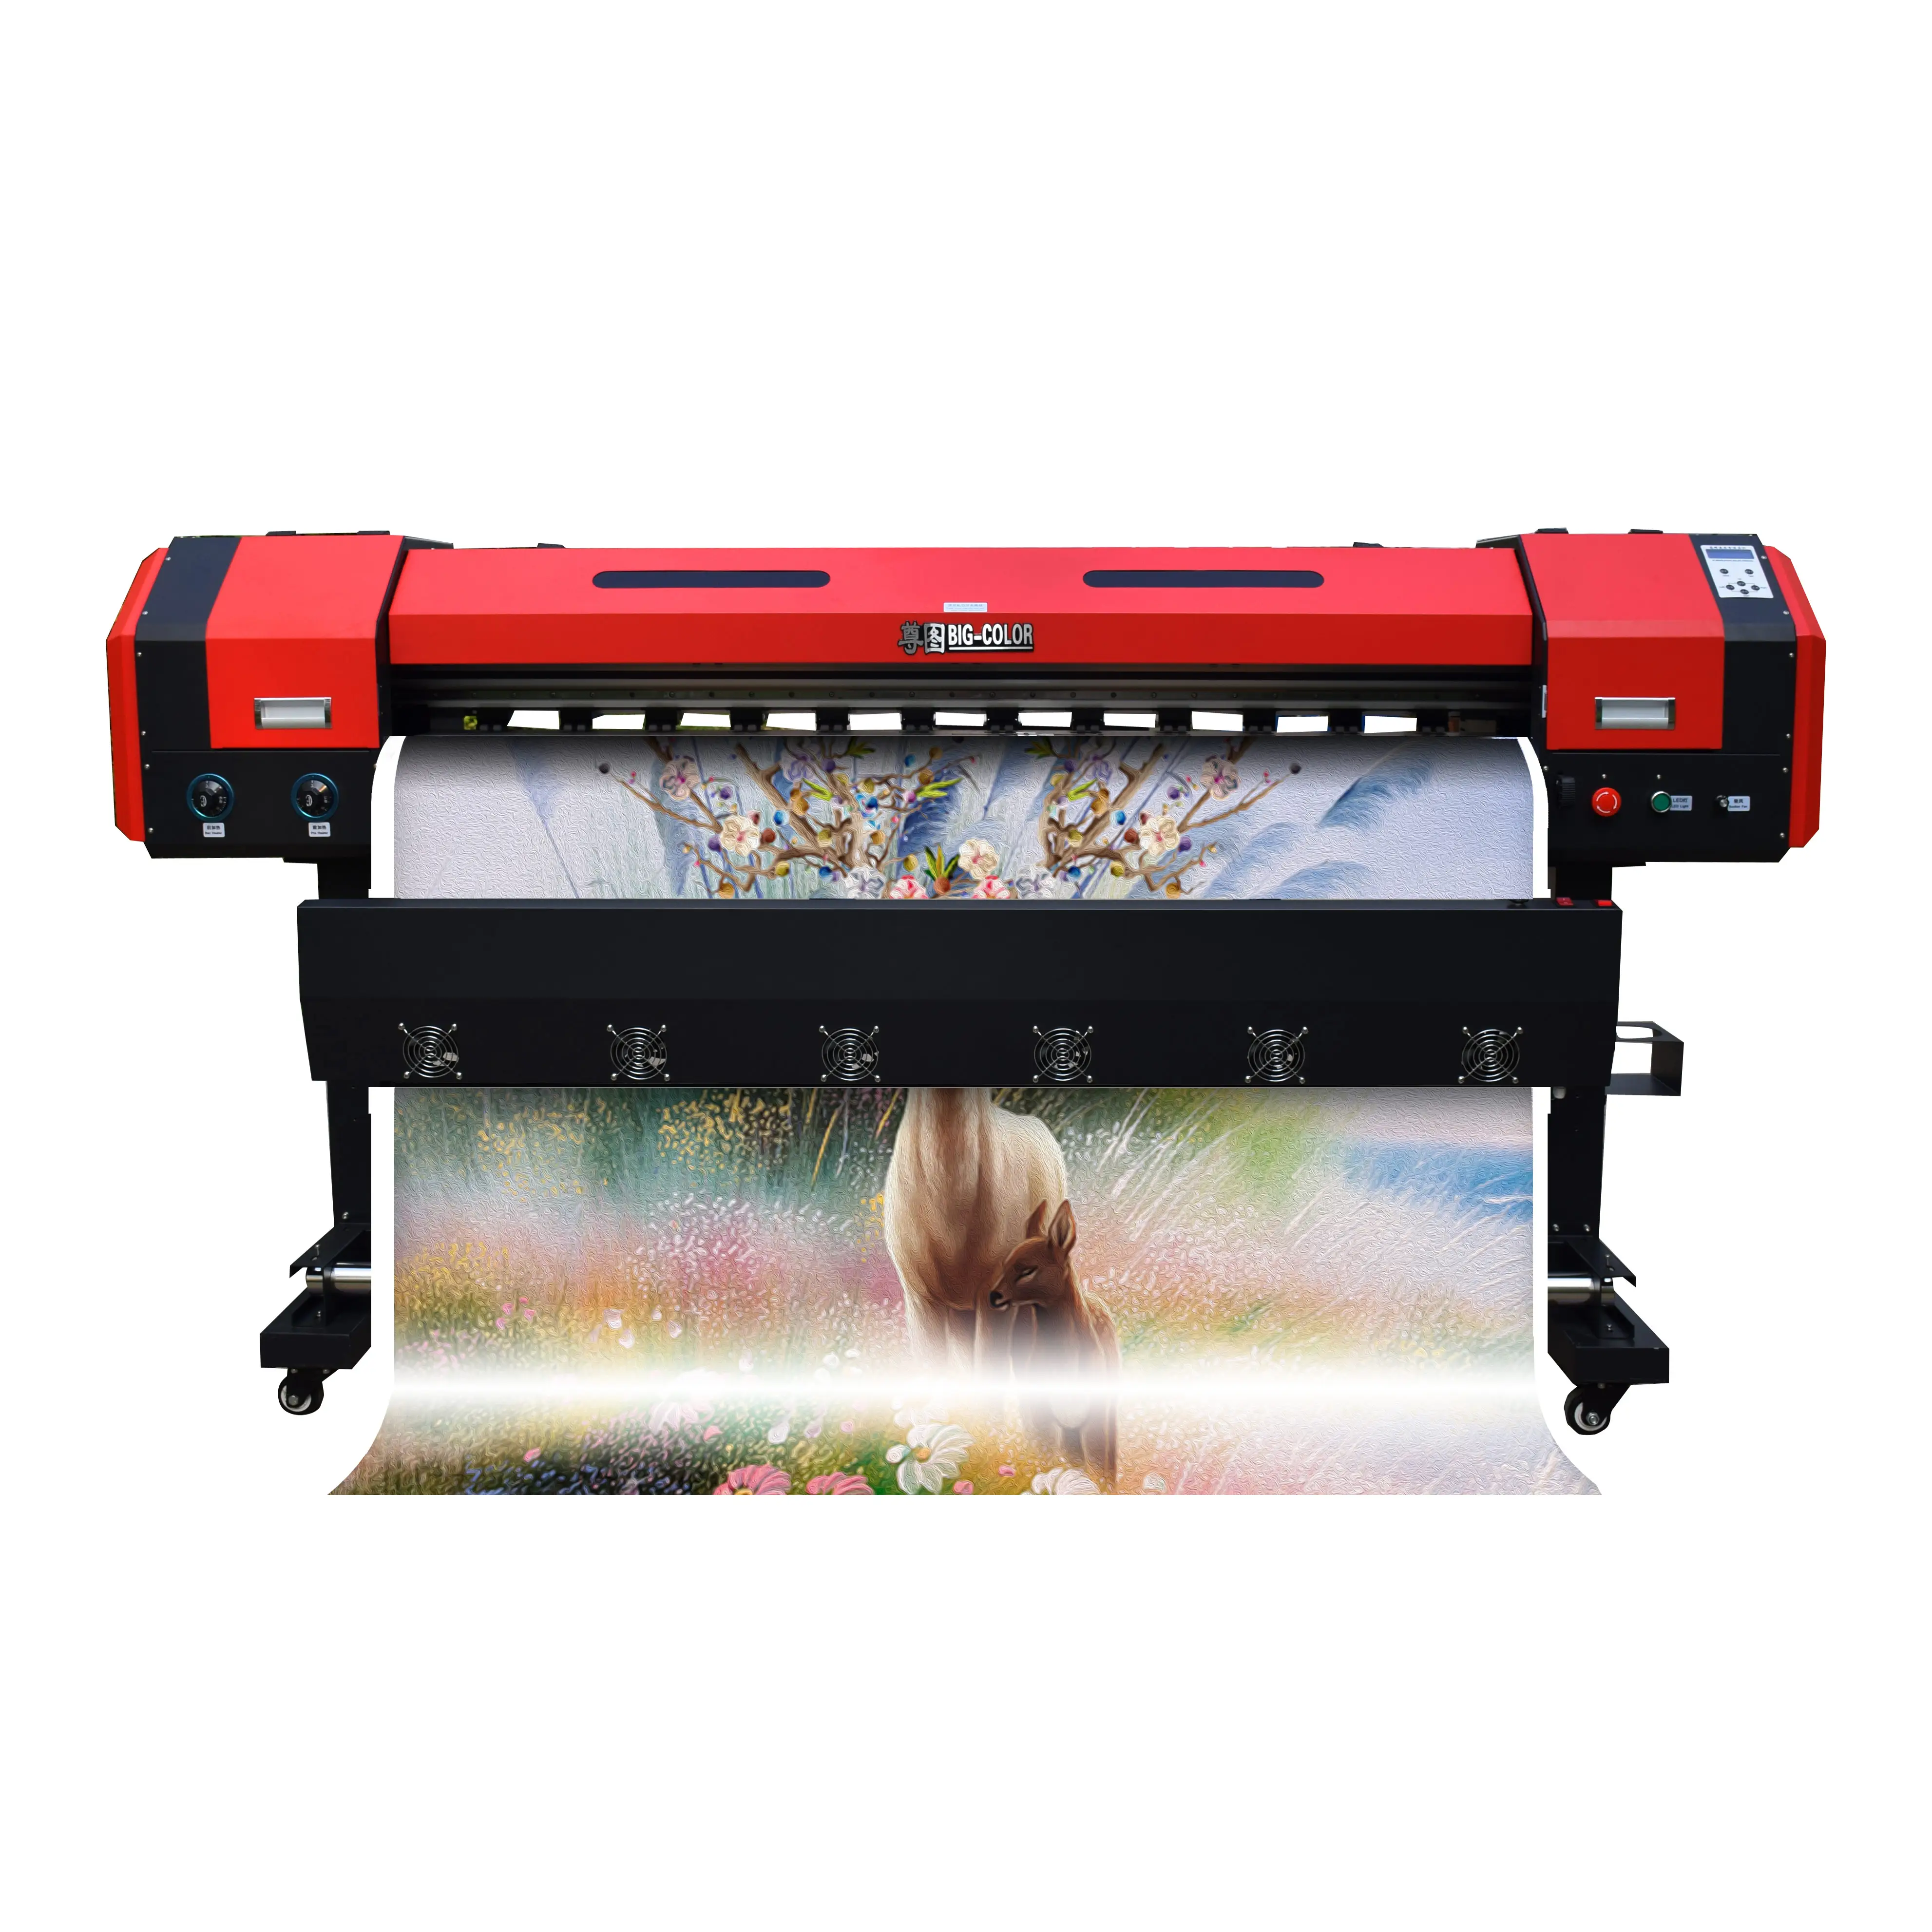 big-color 1.6m roll-to-roll wide format printer plotter UV printer for leather stickers